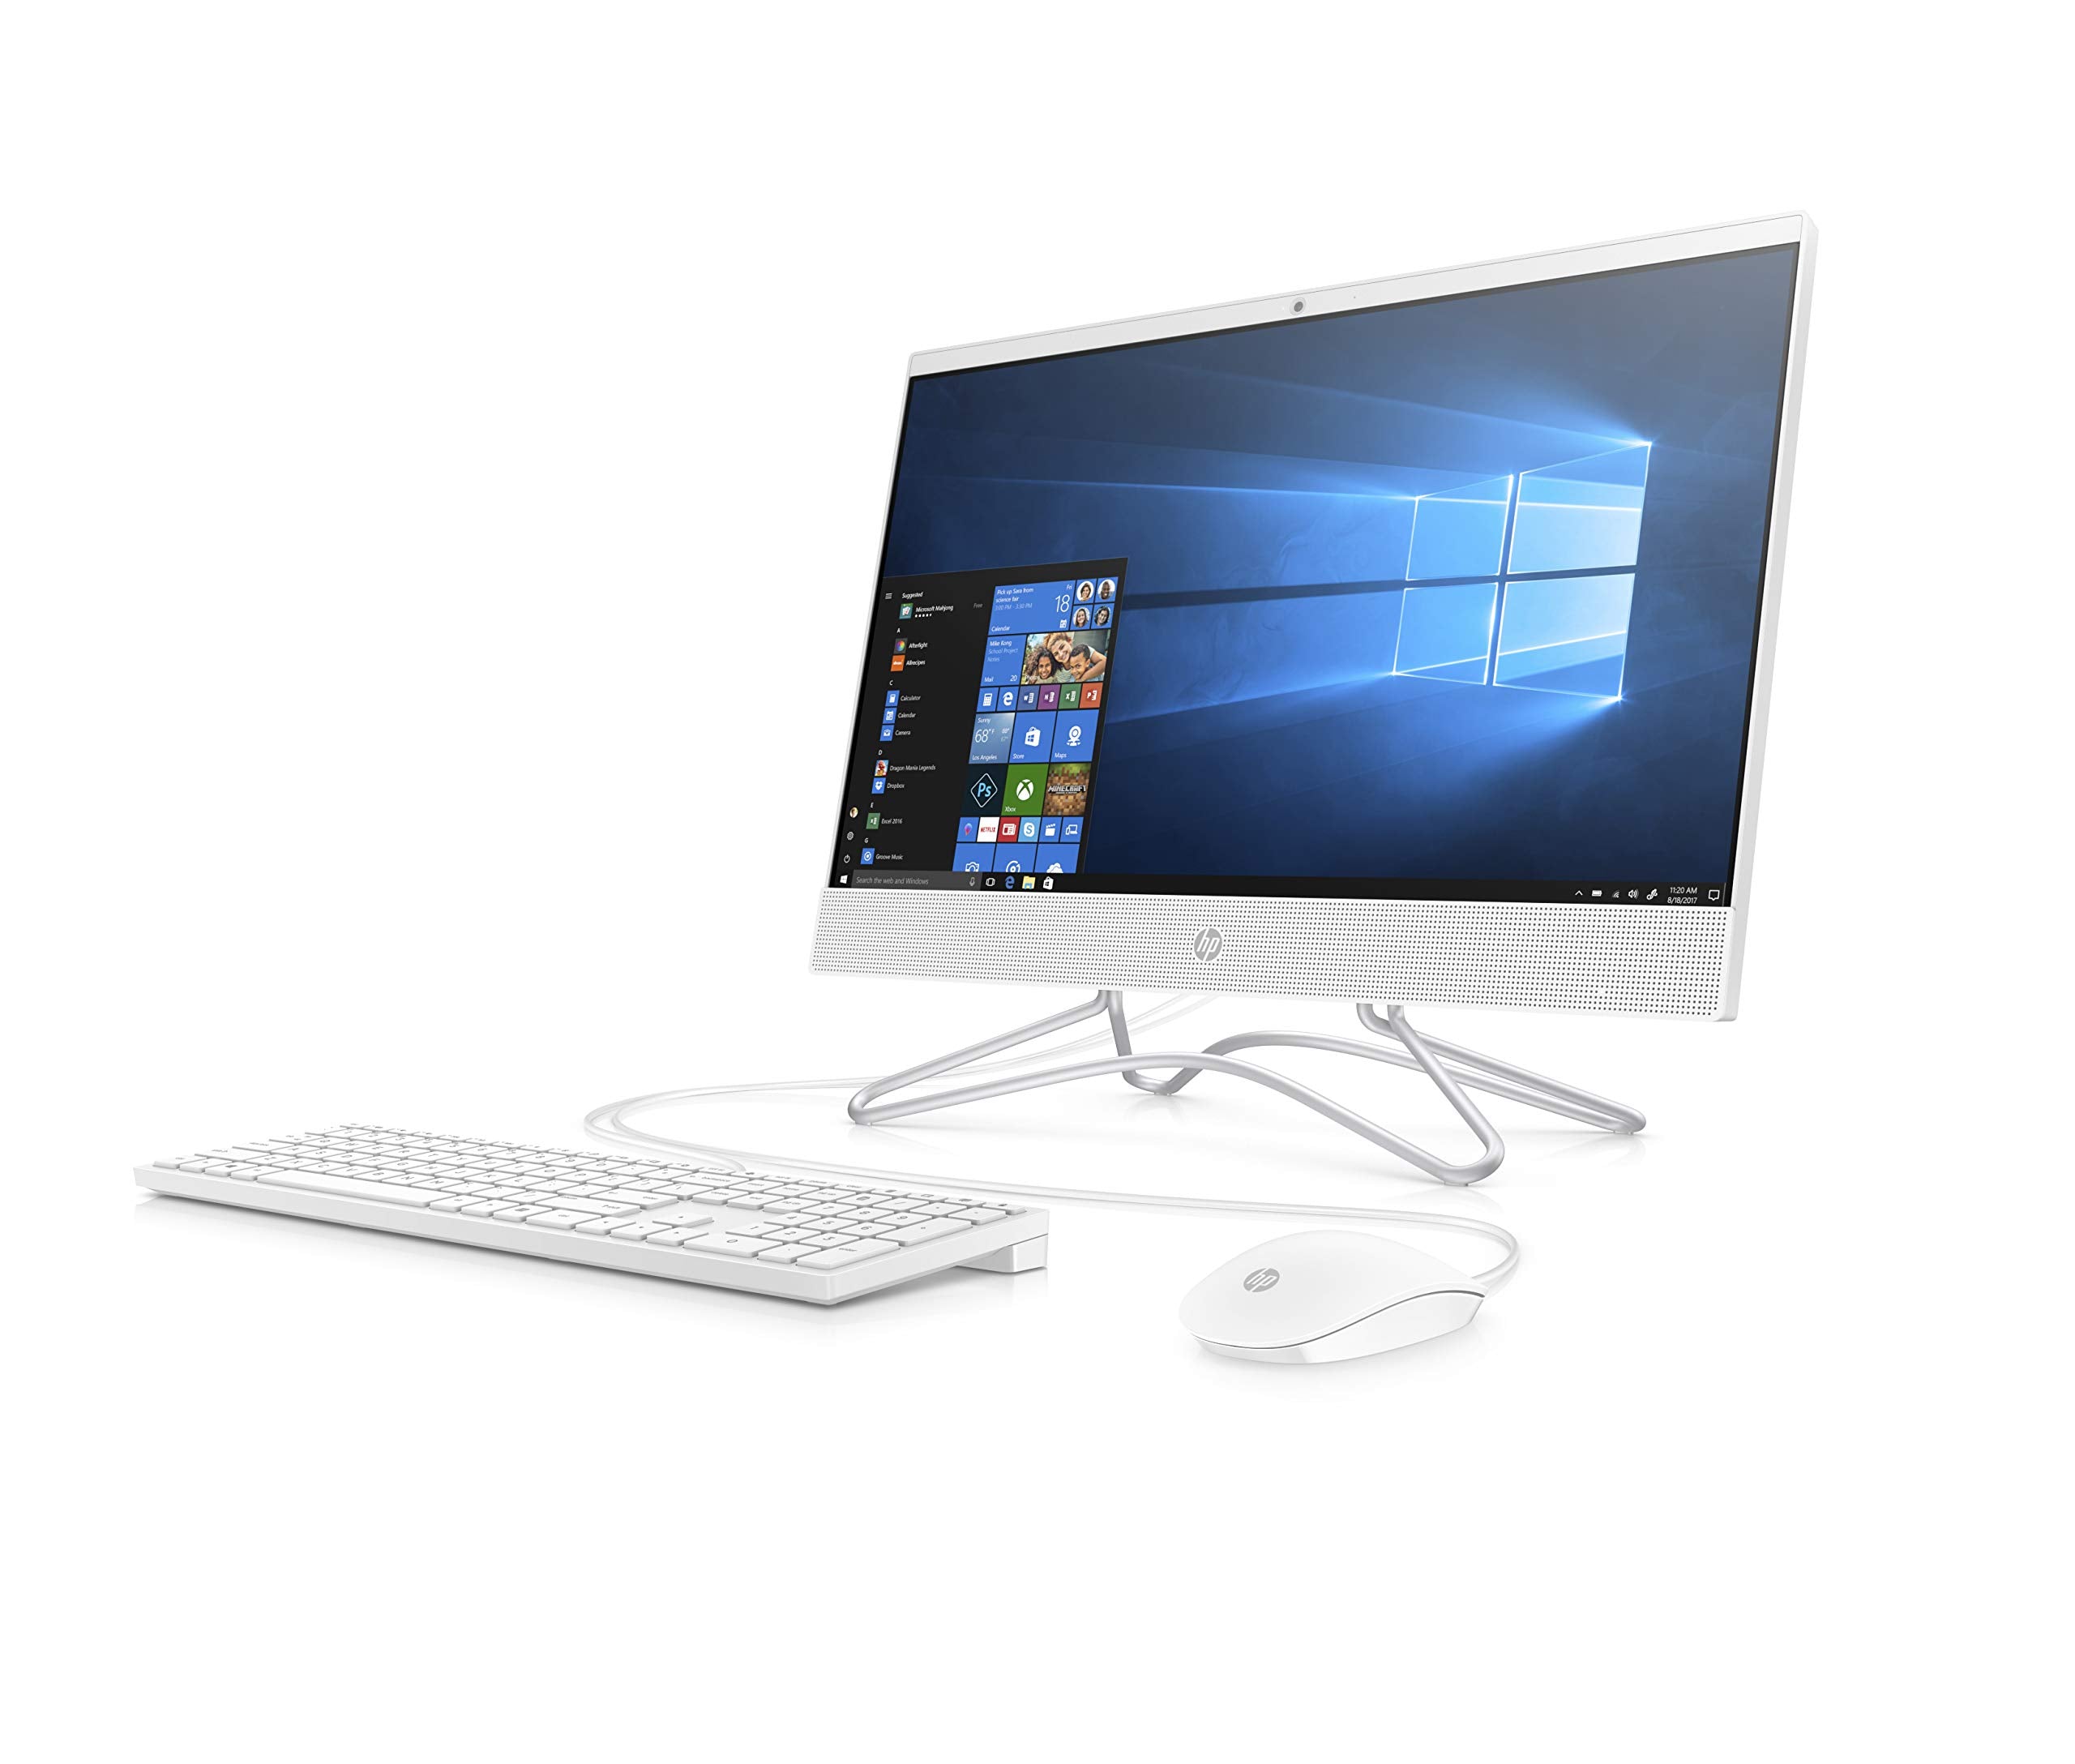 HP 200 G3 All-in-One PC 21.5 Inches LED All-in-One Desktop PC (White) - Intel J5005, 1.5 GHz, 1000 GB HDD, Intel UHD Graphics 605, DOS